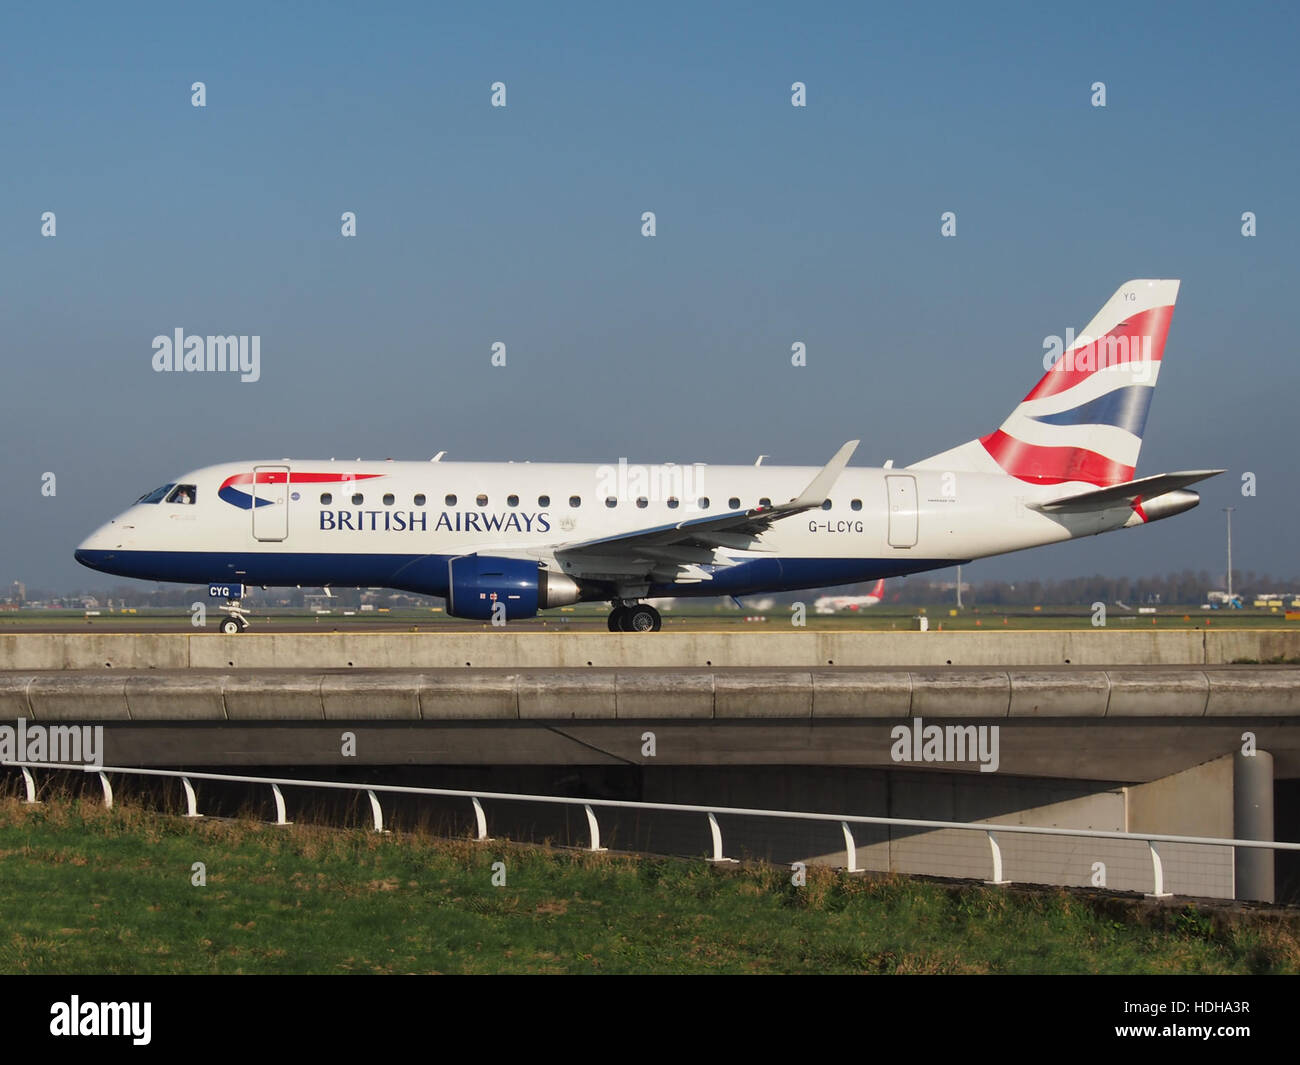 G-LCYG - Embraer ERJ-170STD - British Airways at Schiphol taxiing towards 36L pic4 Stock Photo